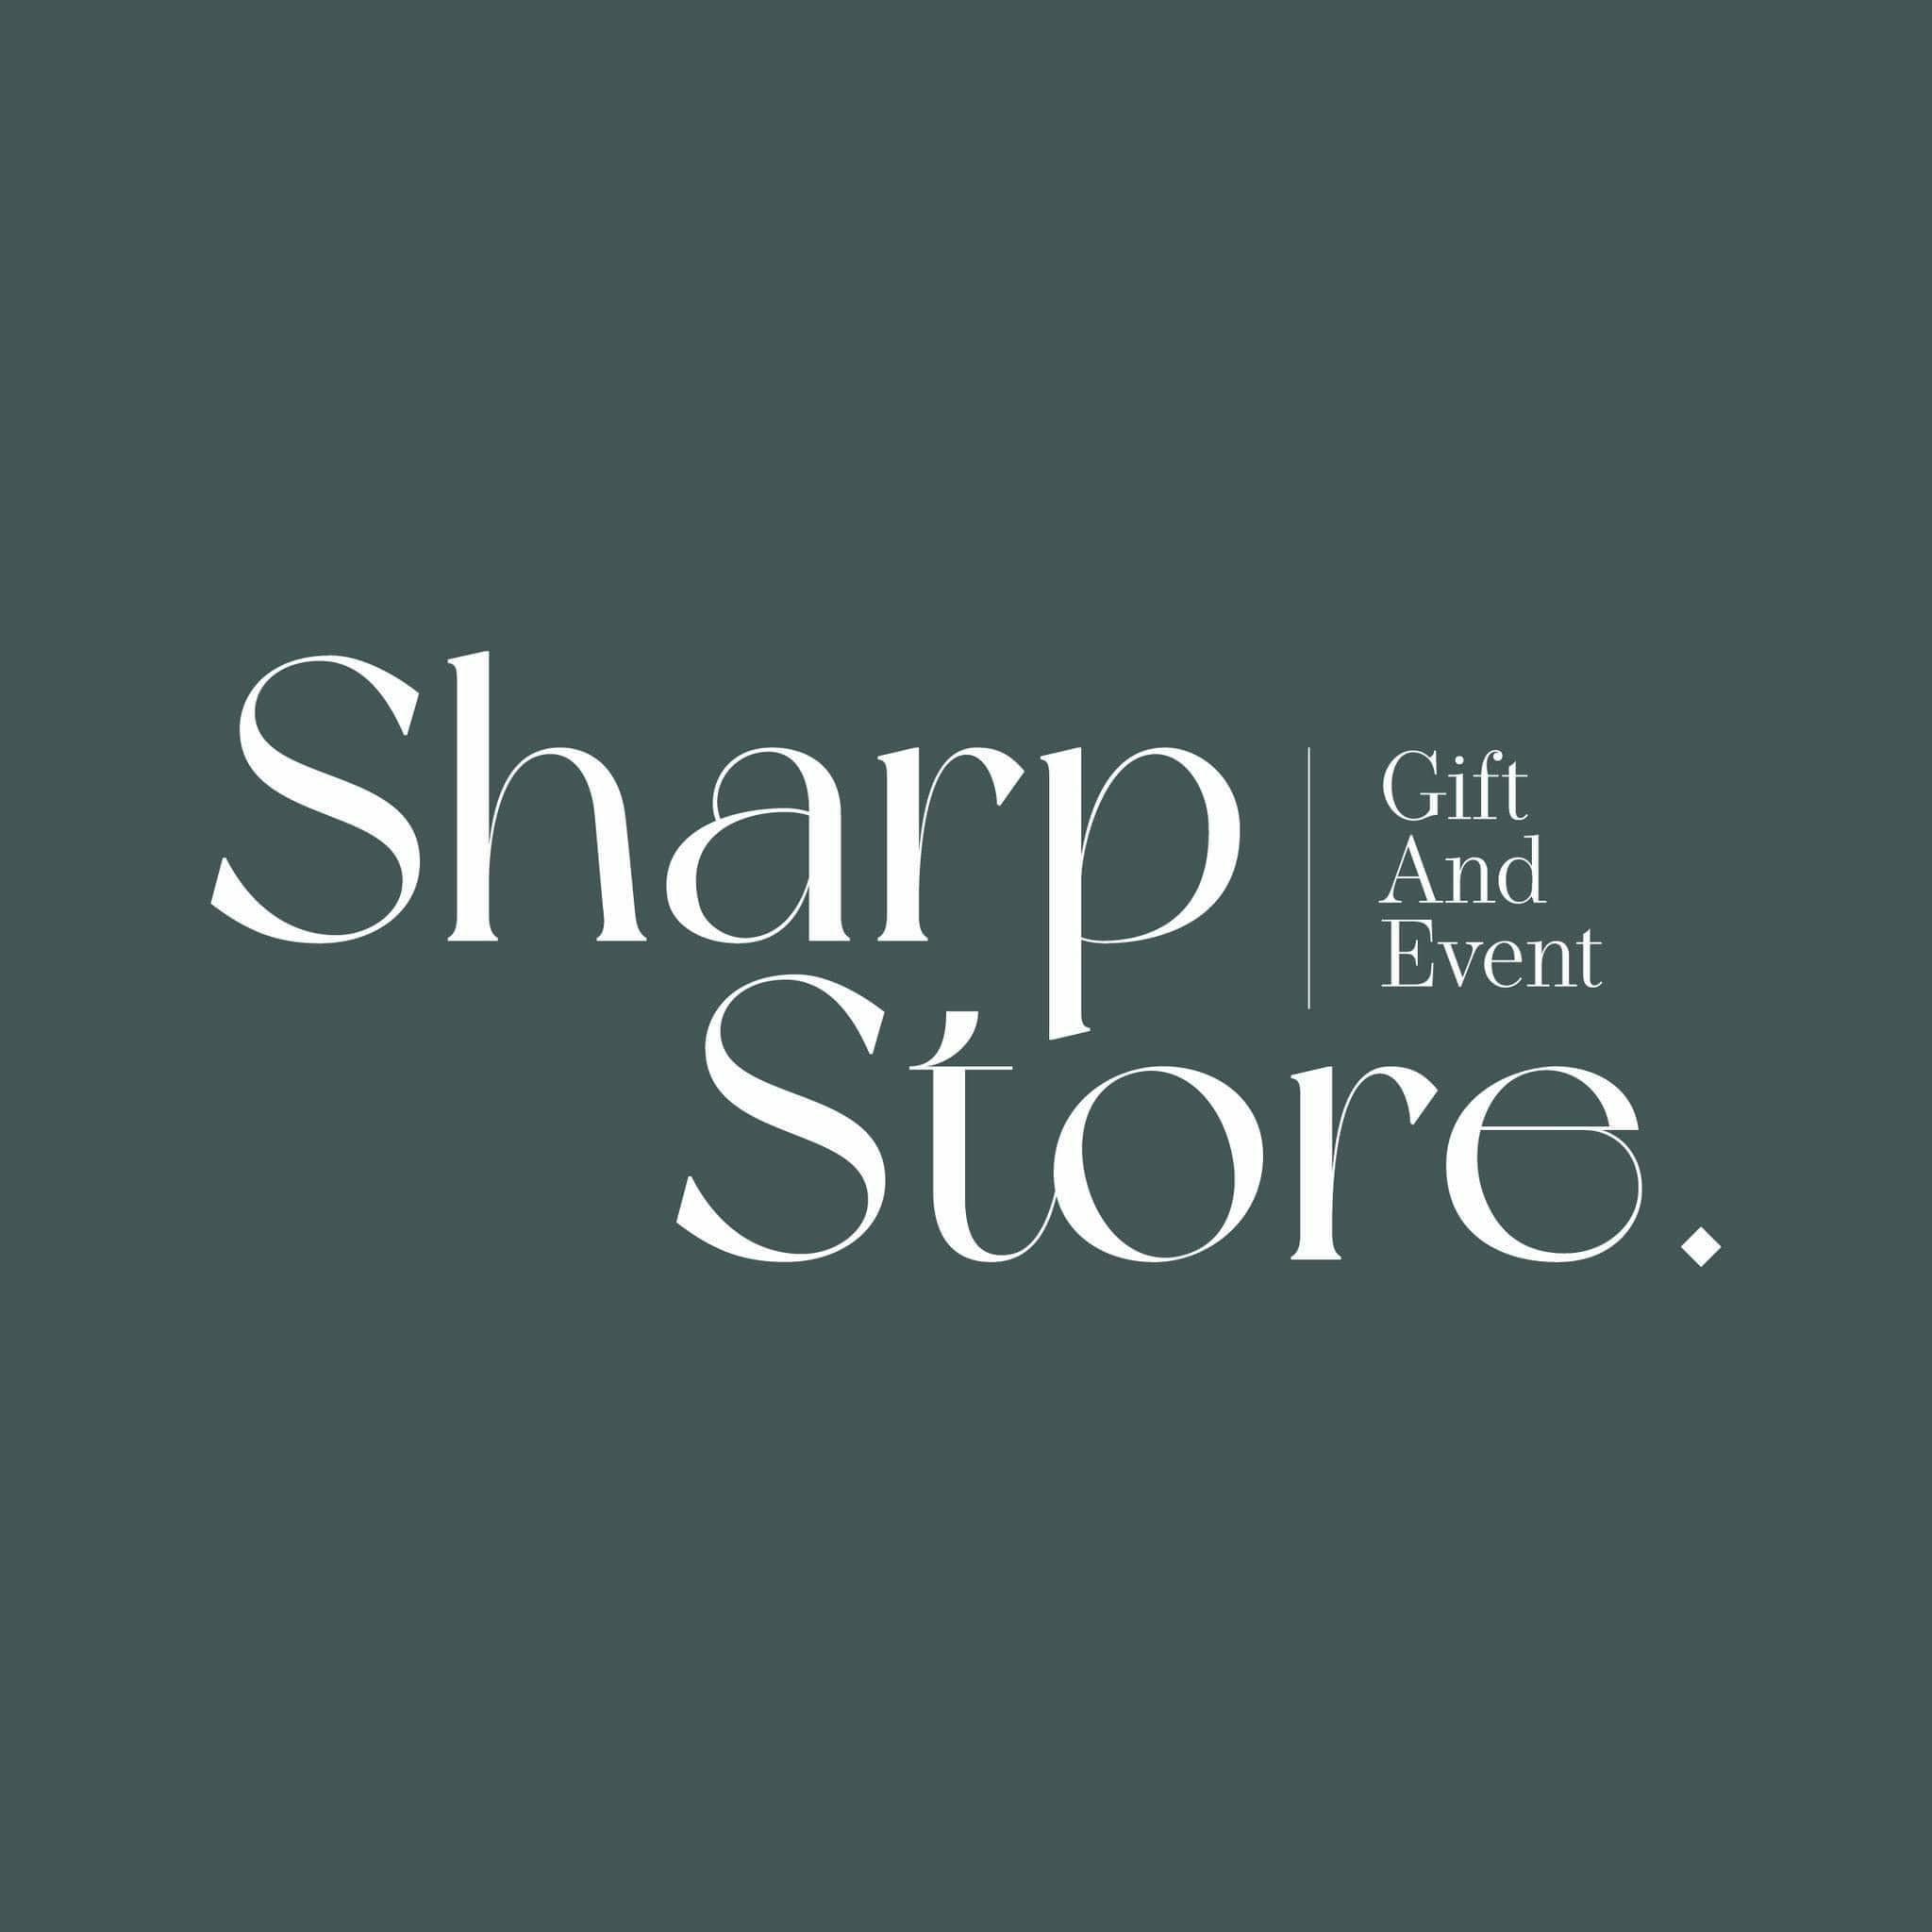 Sharp Gift And Event Store logo